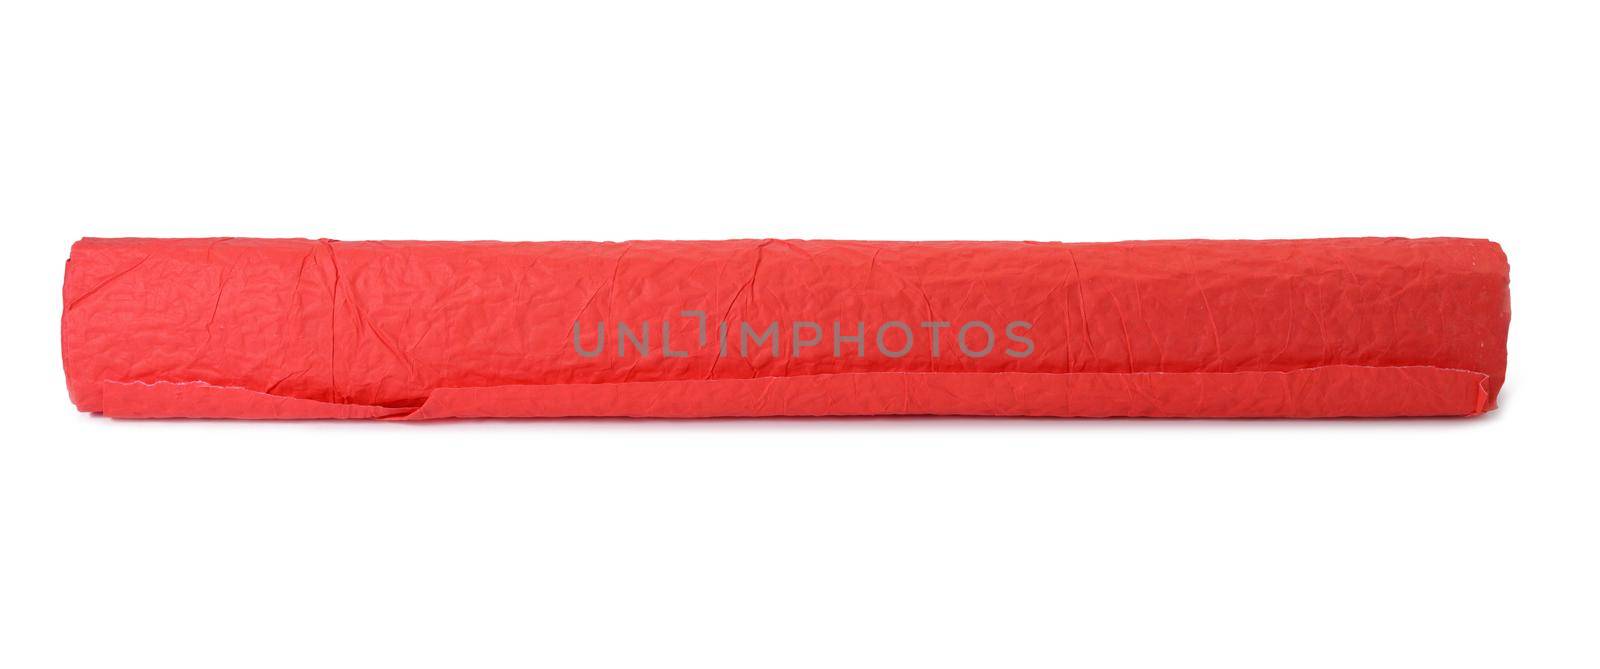 roll of red crumpled paper for gift wrapping isolated on white background by ndanko